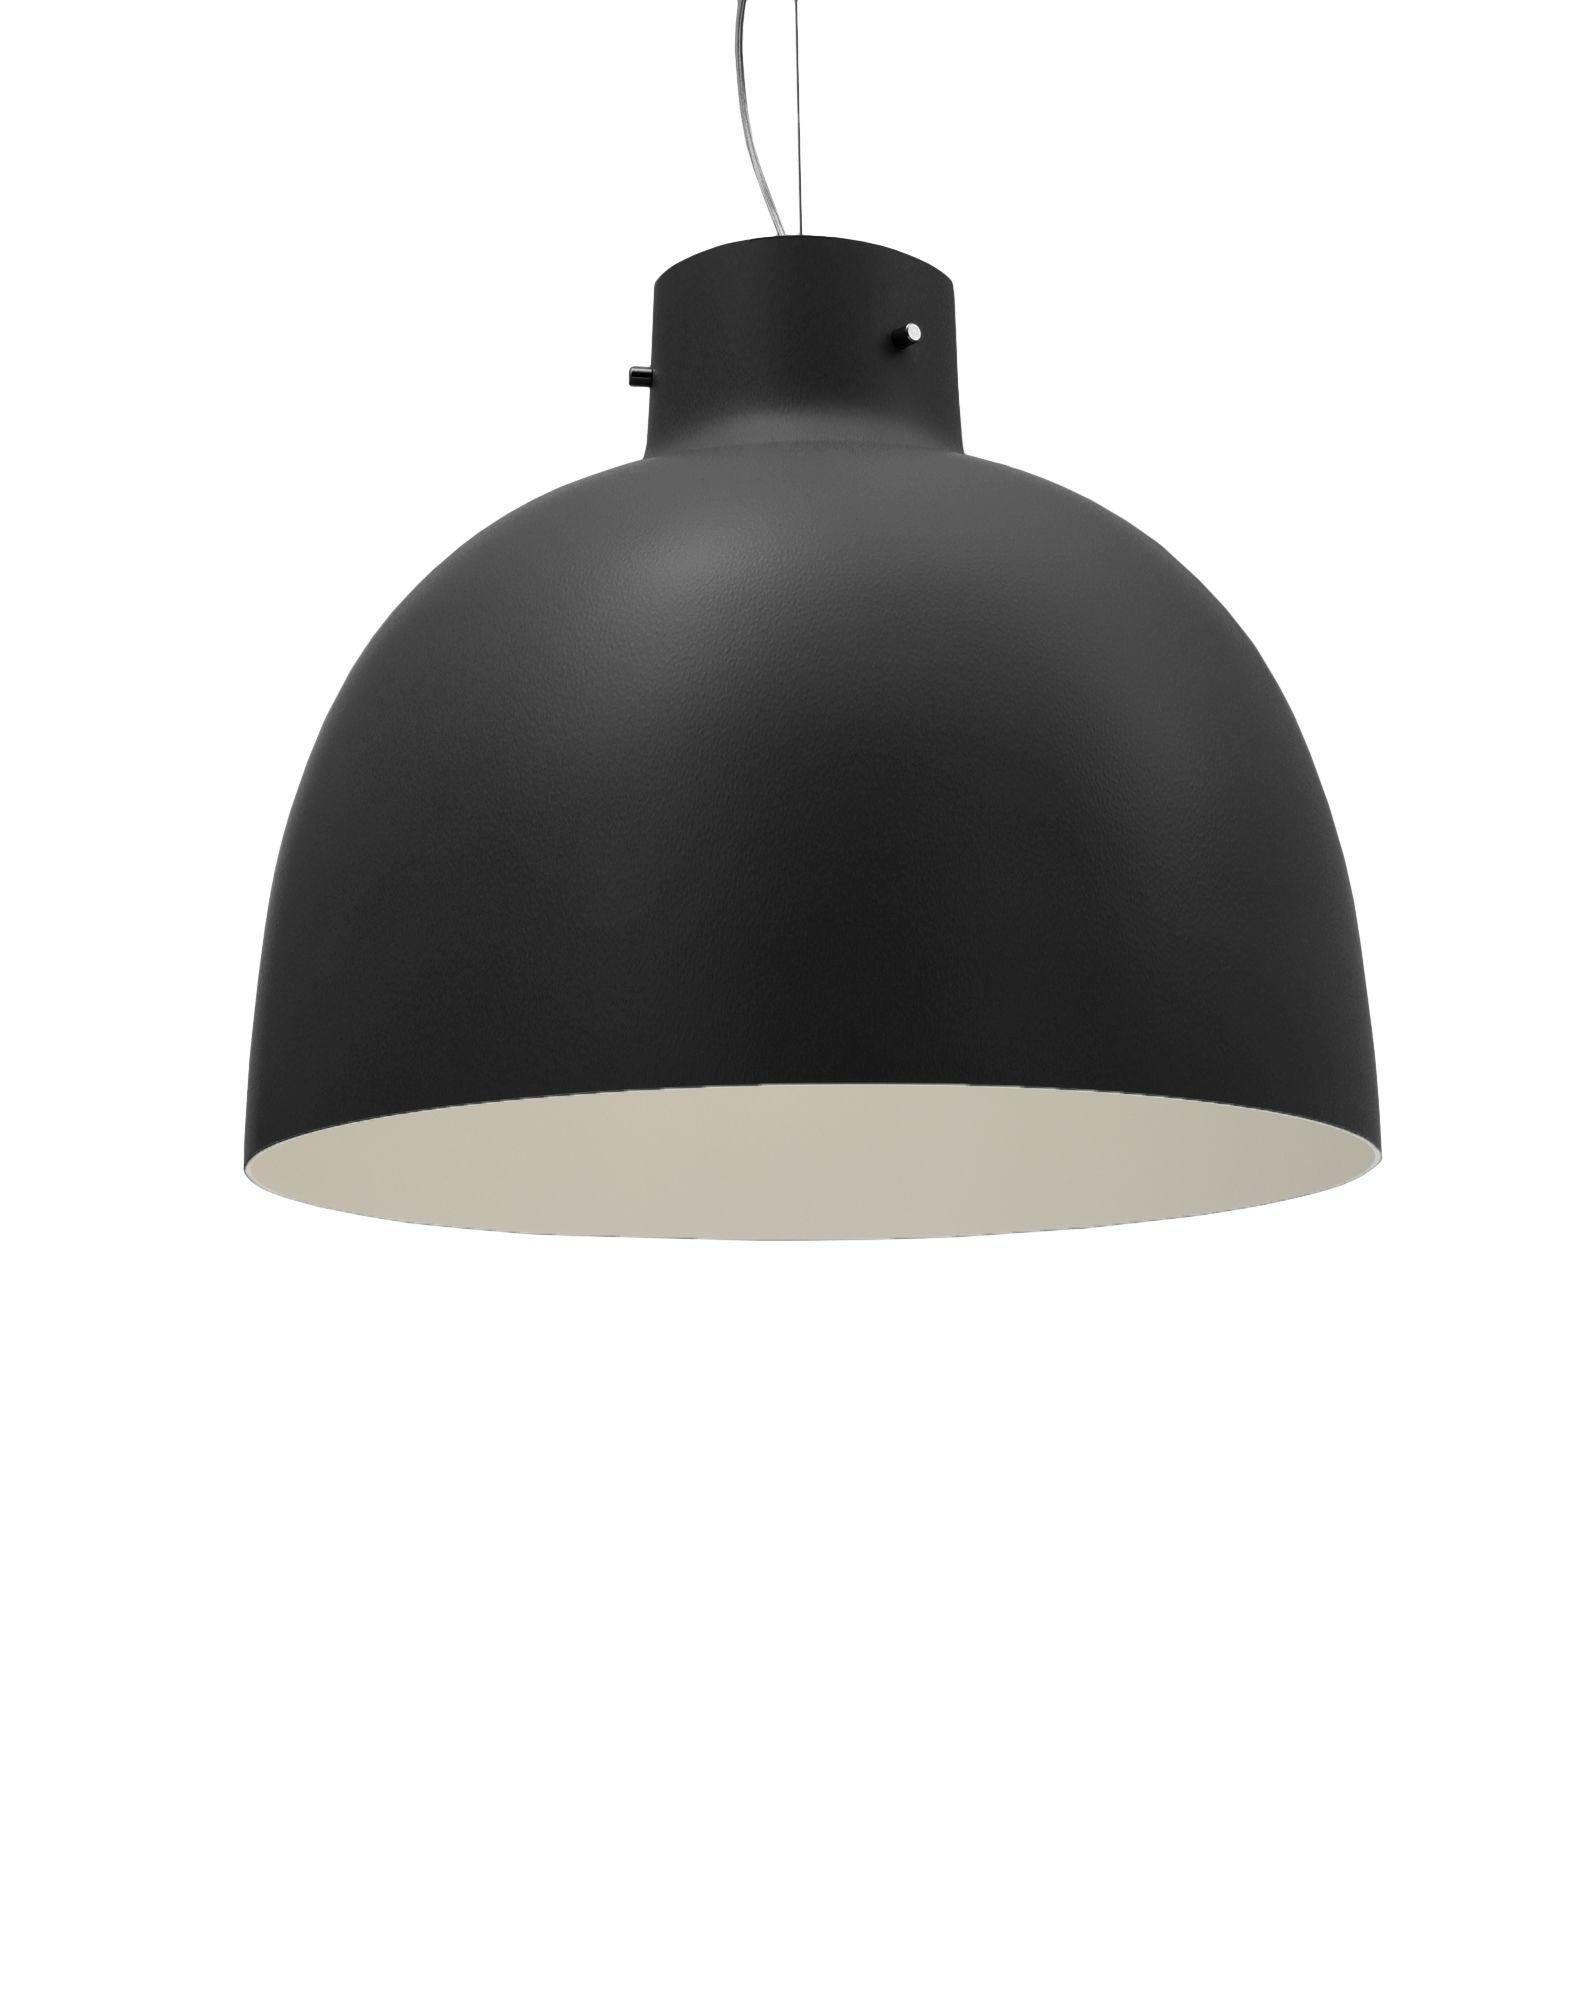 Bellissima is presented in the material version of matte in black and white.

Dimensions: Height 16.14 in.; Width 19.67 in.; Depth 19.67 in.; Unit weight: 3.6 kg. Made of: Thermoplastic Technopolymer. Assembly required. Voltage: 120. Cord length